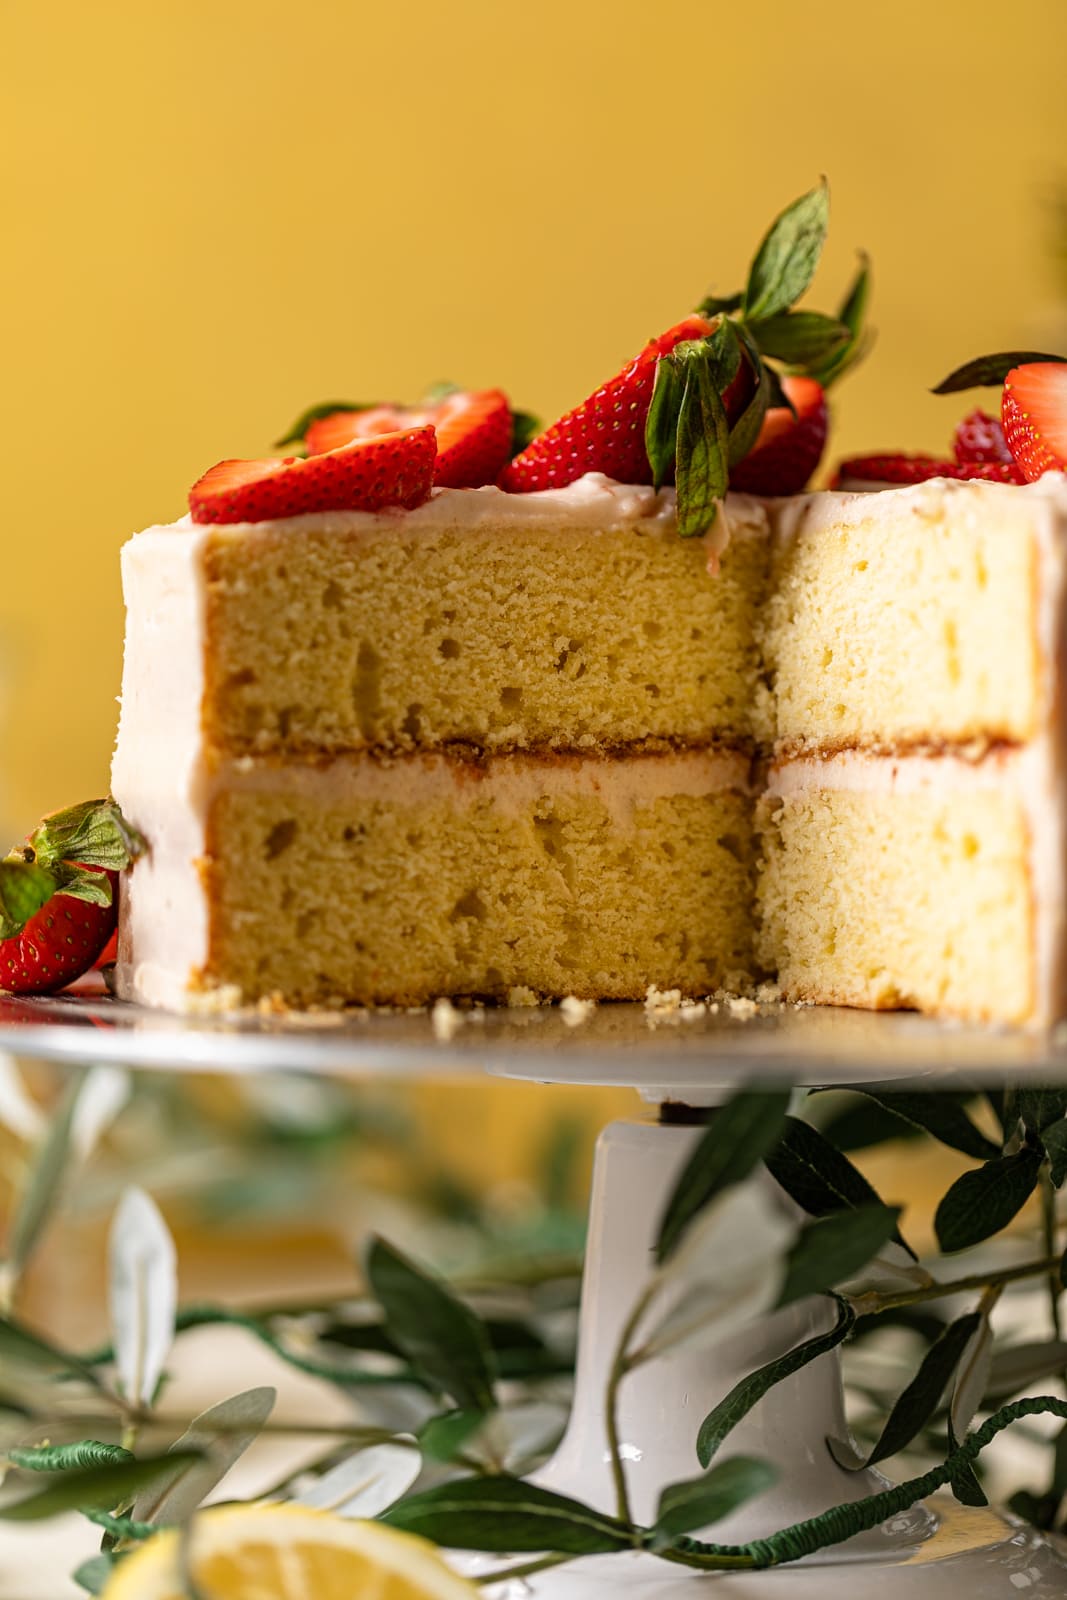 Elevated platter with a Lemon Strawberry Layer Cake that is missing a slice